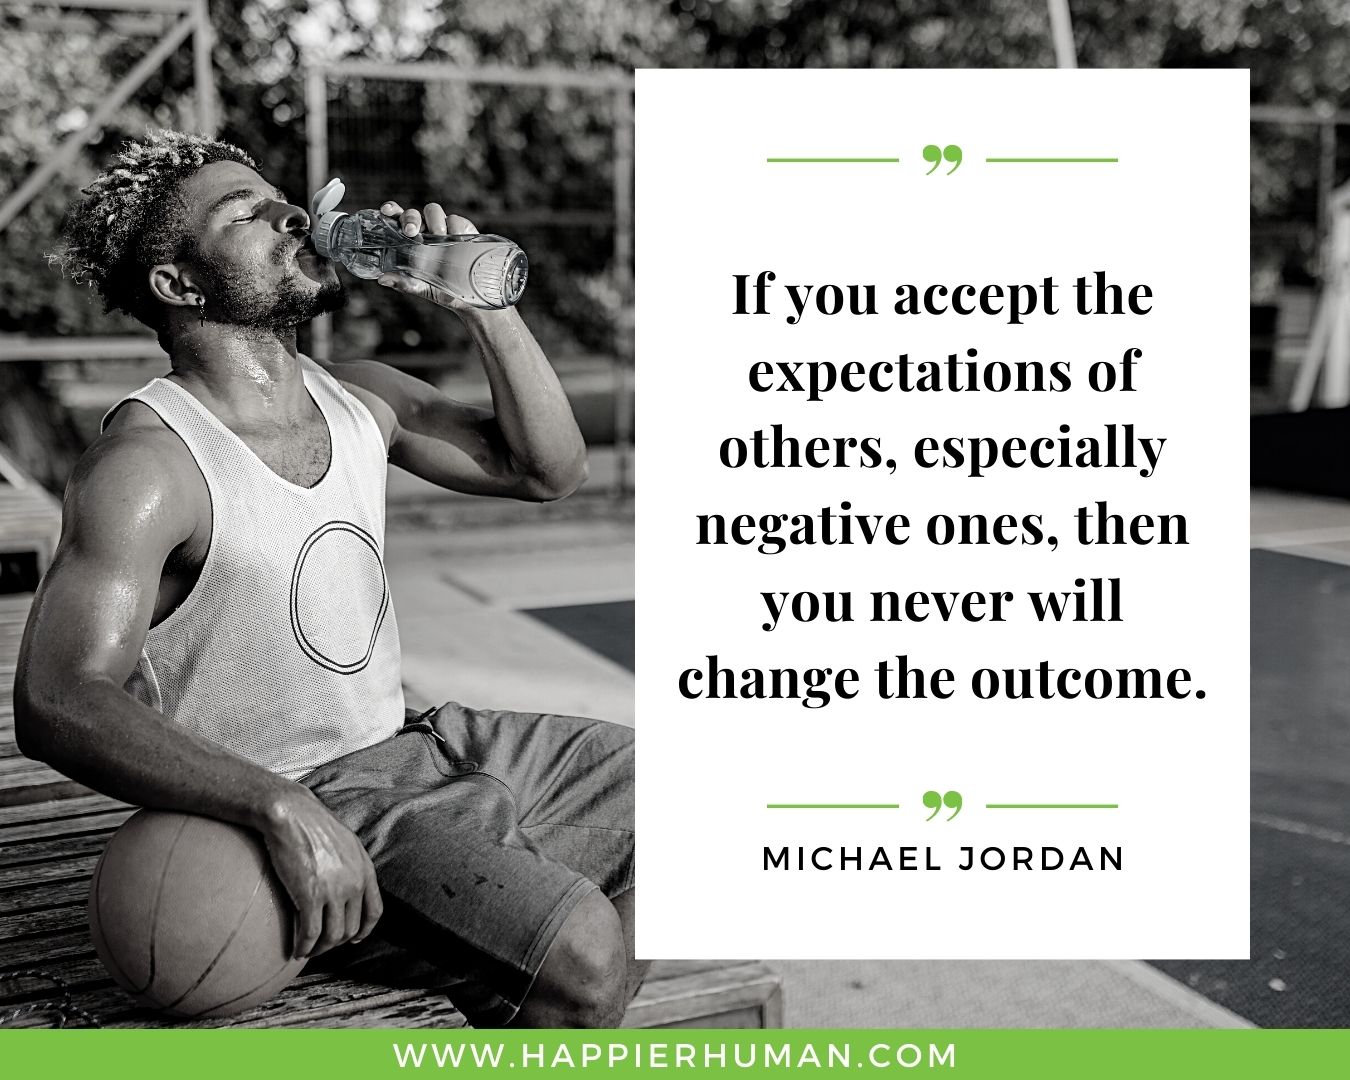 Toxic People Quotes - “If you accept the expectations of others, especially negative ones, then you never will change the outcome.” – Michael Jordan